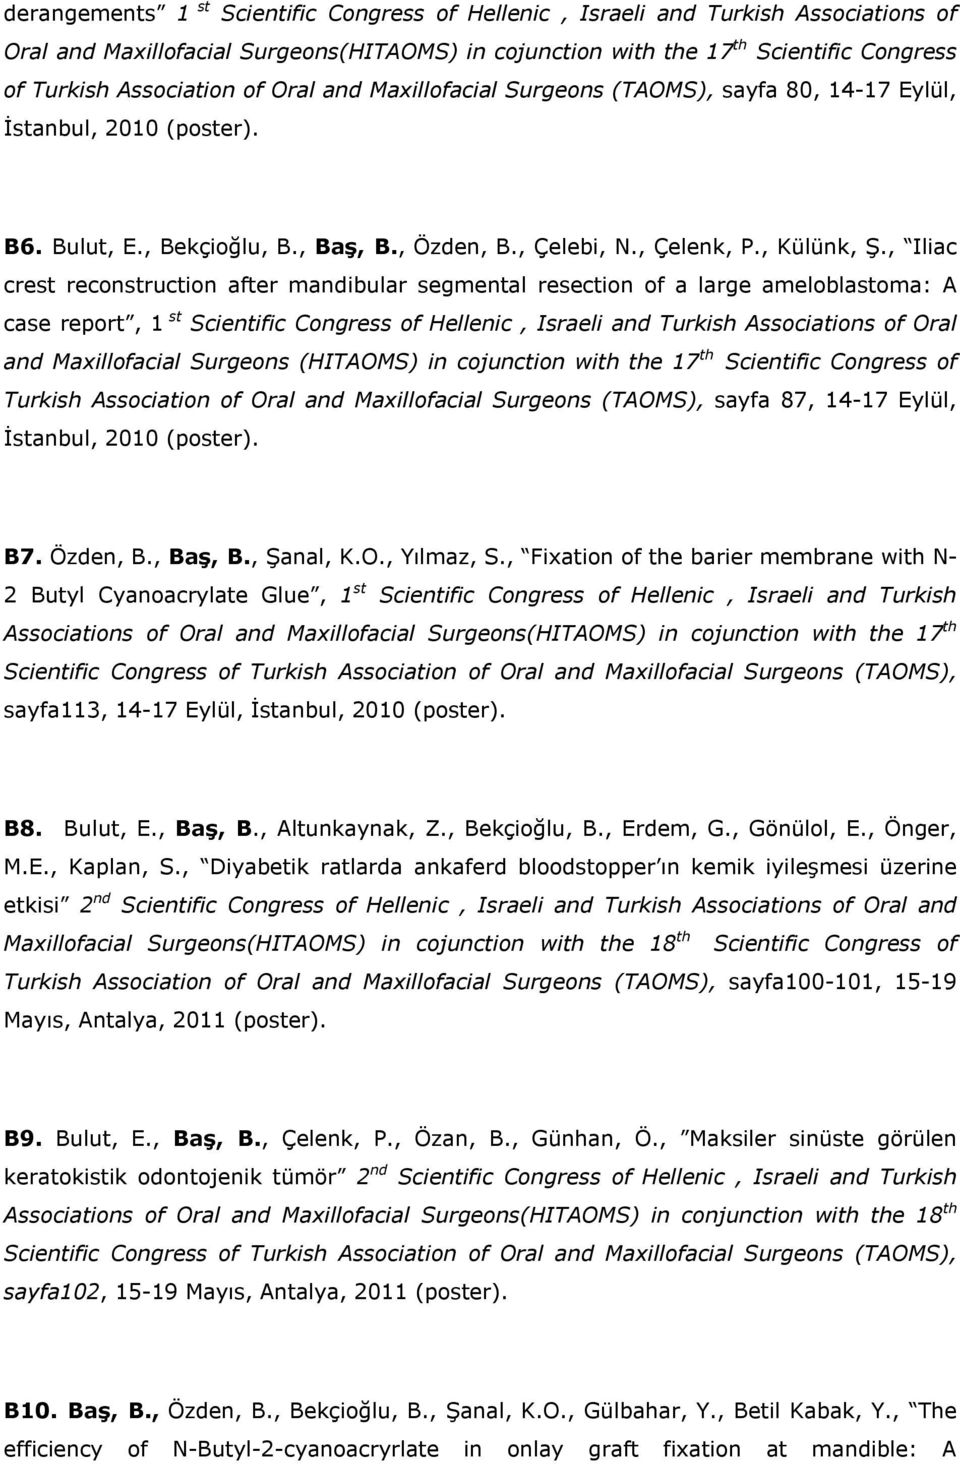 , Iliac crest reconstruction after mandibular segmental resection of a large ameloblastoma: A case report, 1 st Scientific Congress of Hellenic, Israeli and Turkish Associations of Oral and